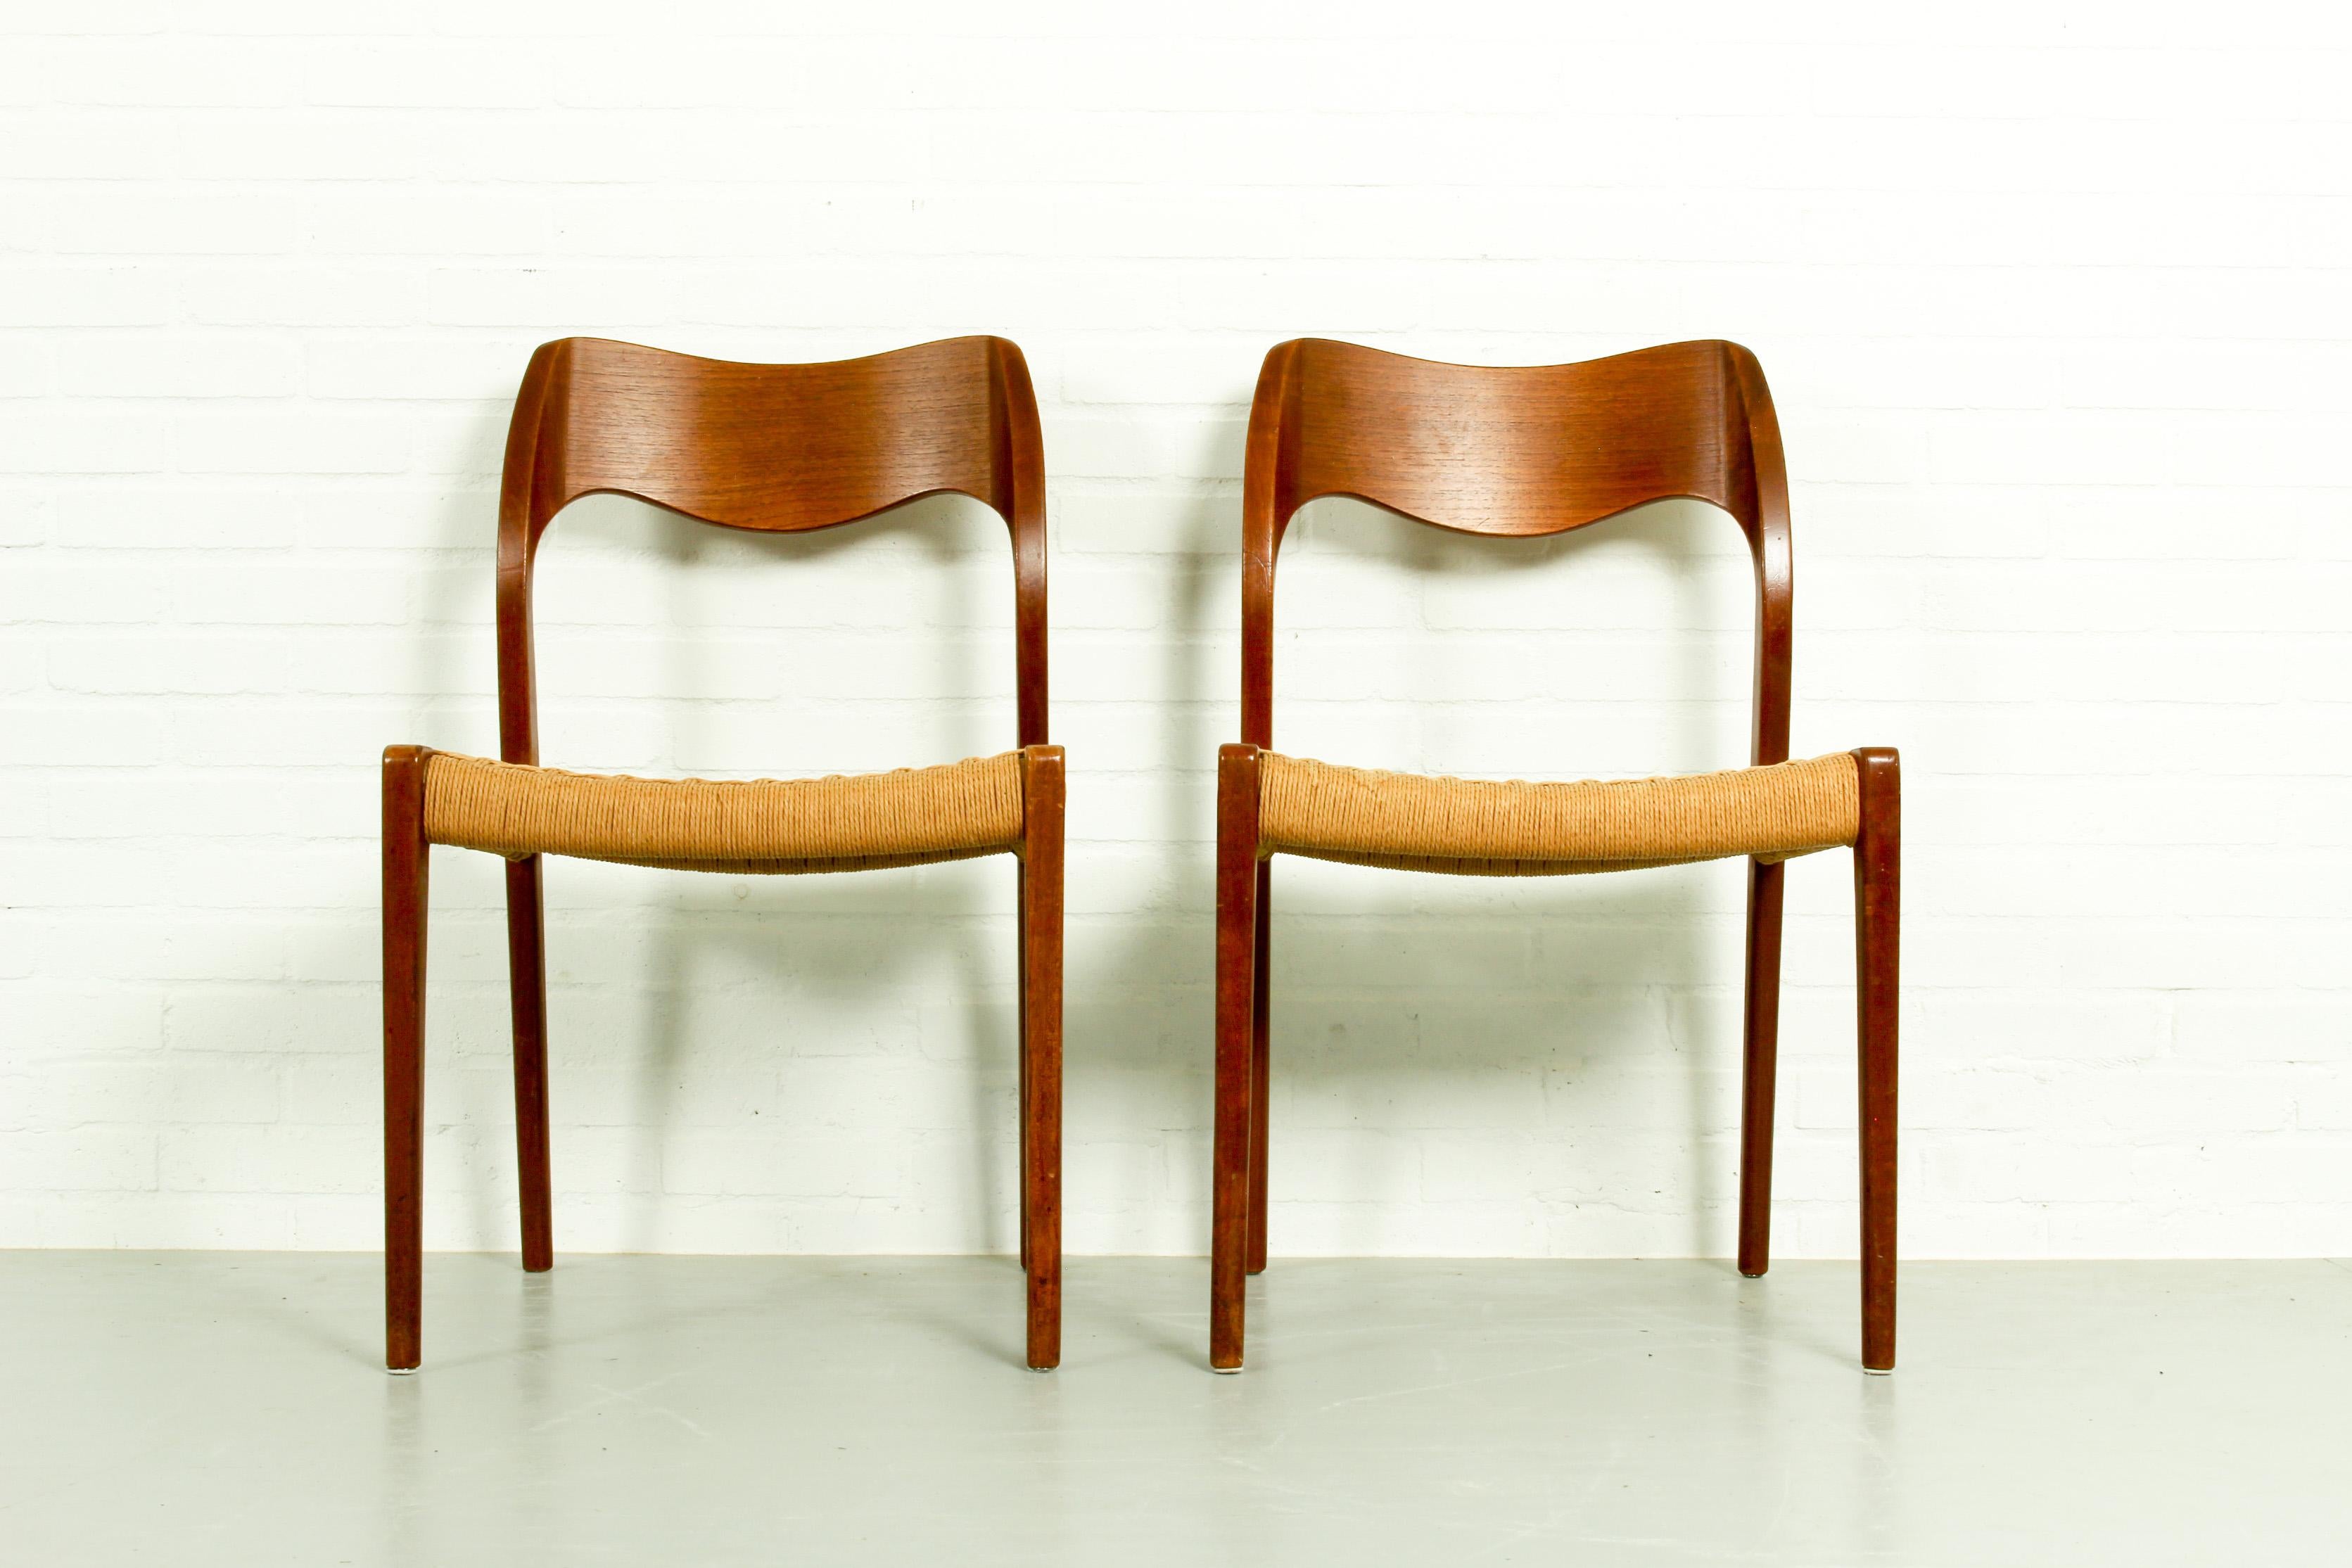 Mid-20th Century Pair of Teak Model 71 Dining Chairs by Niels Otto Møller for J.L. Møllers, 1950s